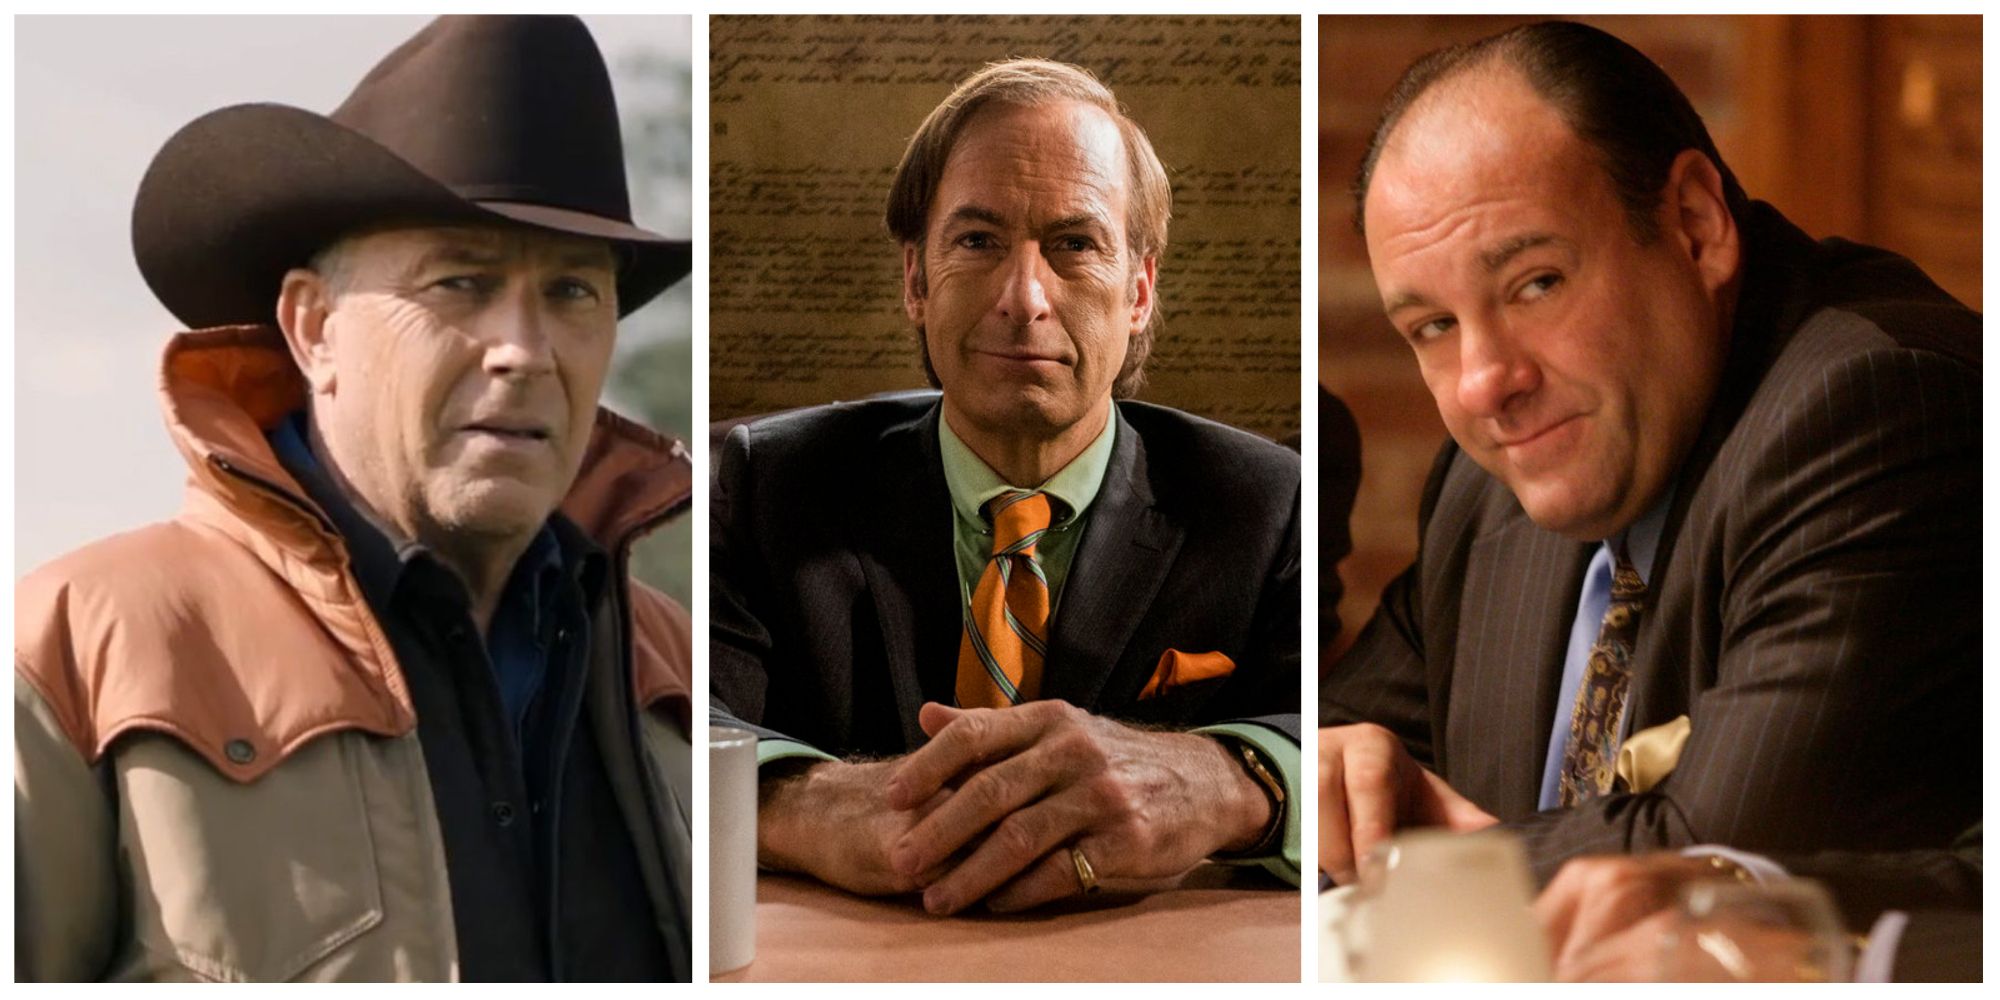 yellowstone, better call saul, and the sopranos